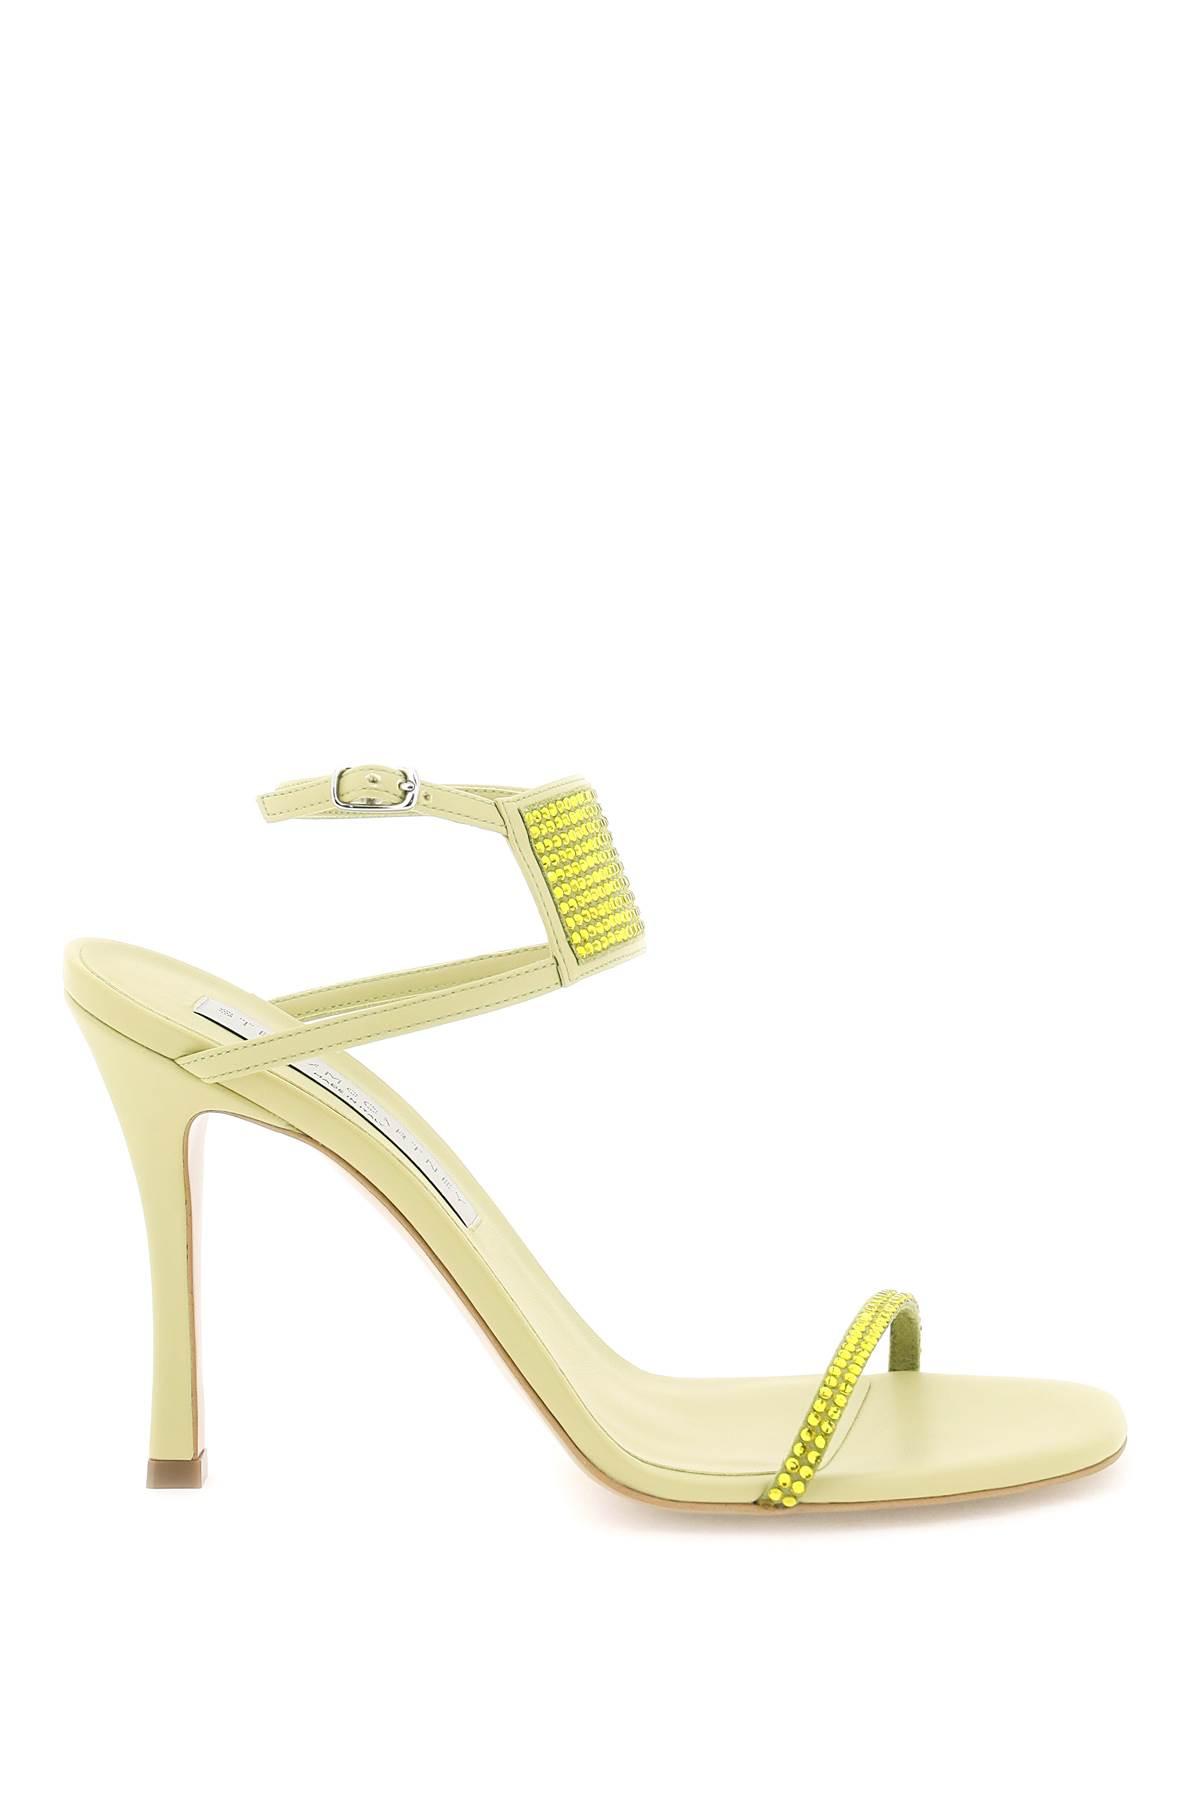 STELLA McCARTNEY FAUX LEATHER SANDALS WITH CRYSTALS